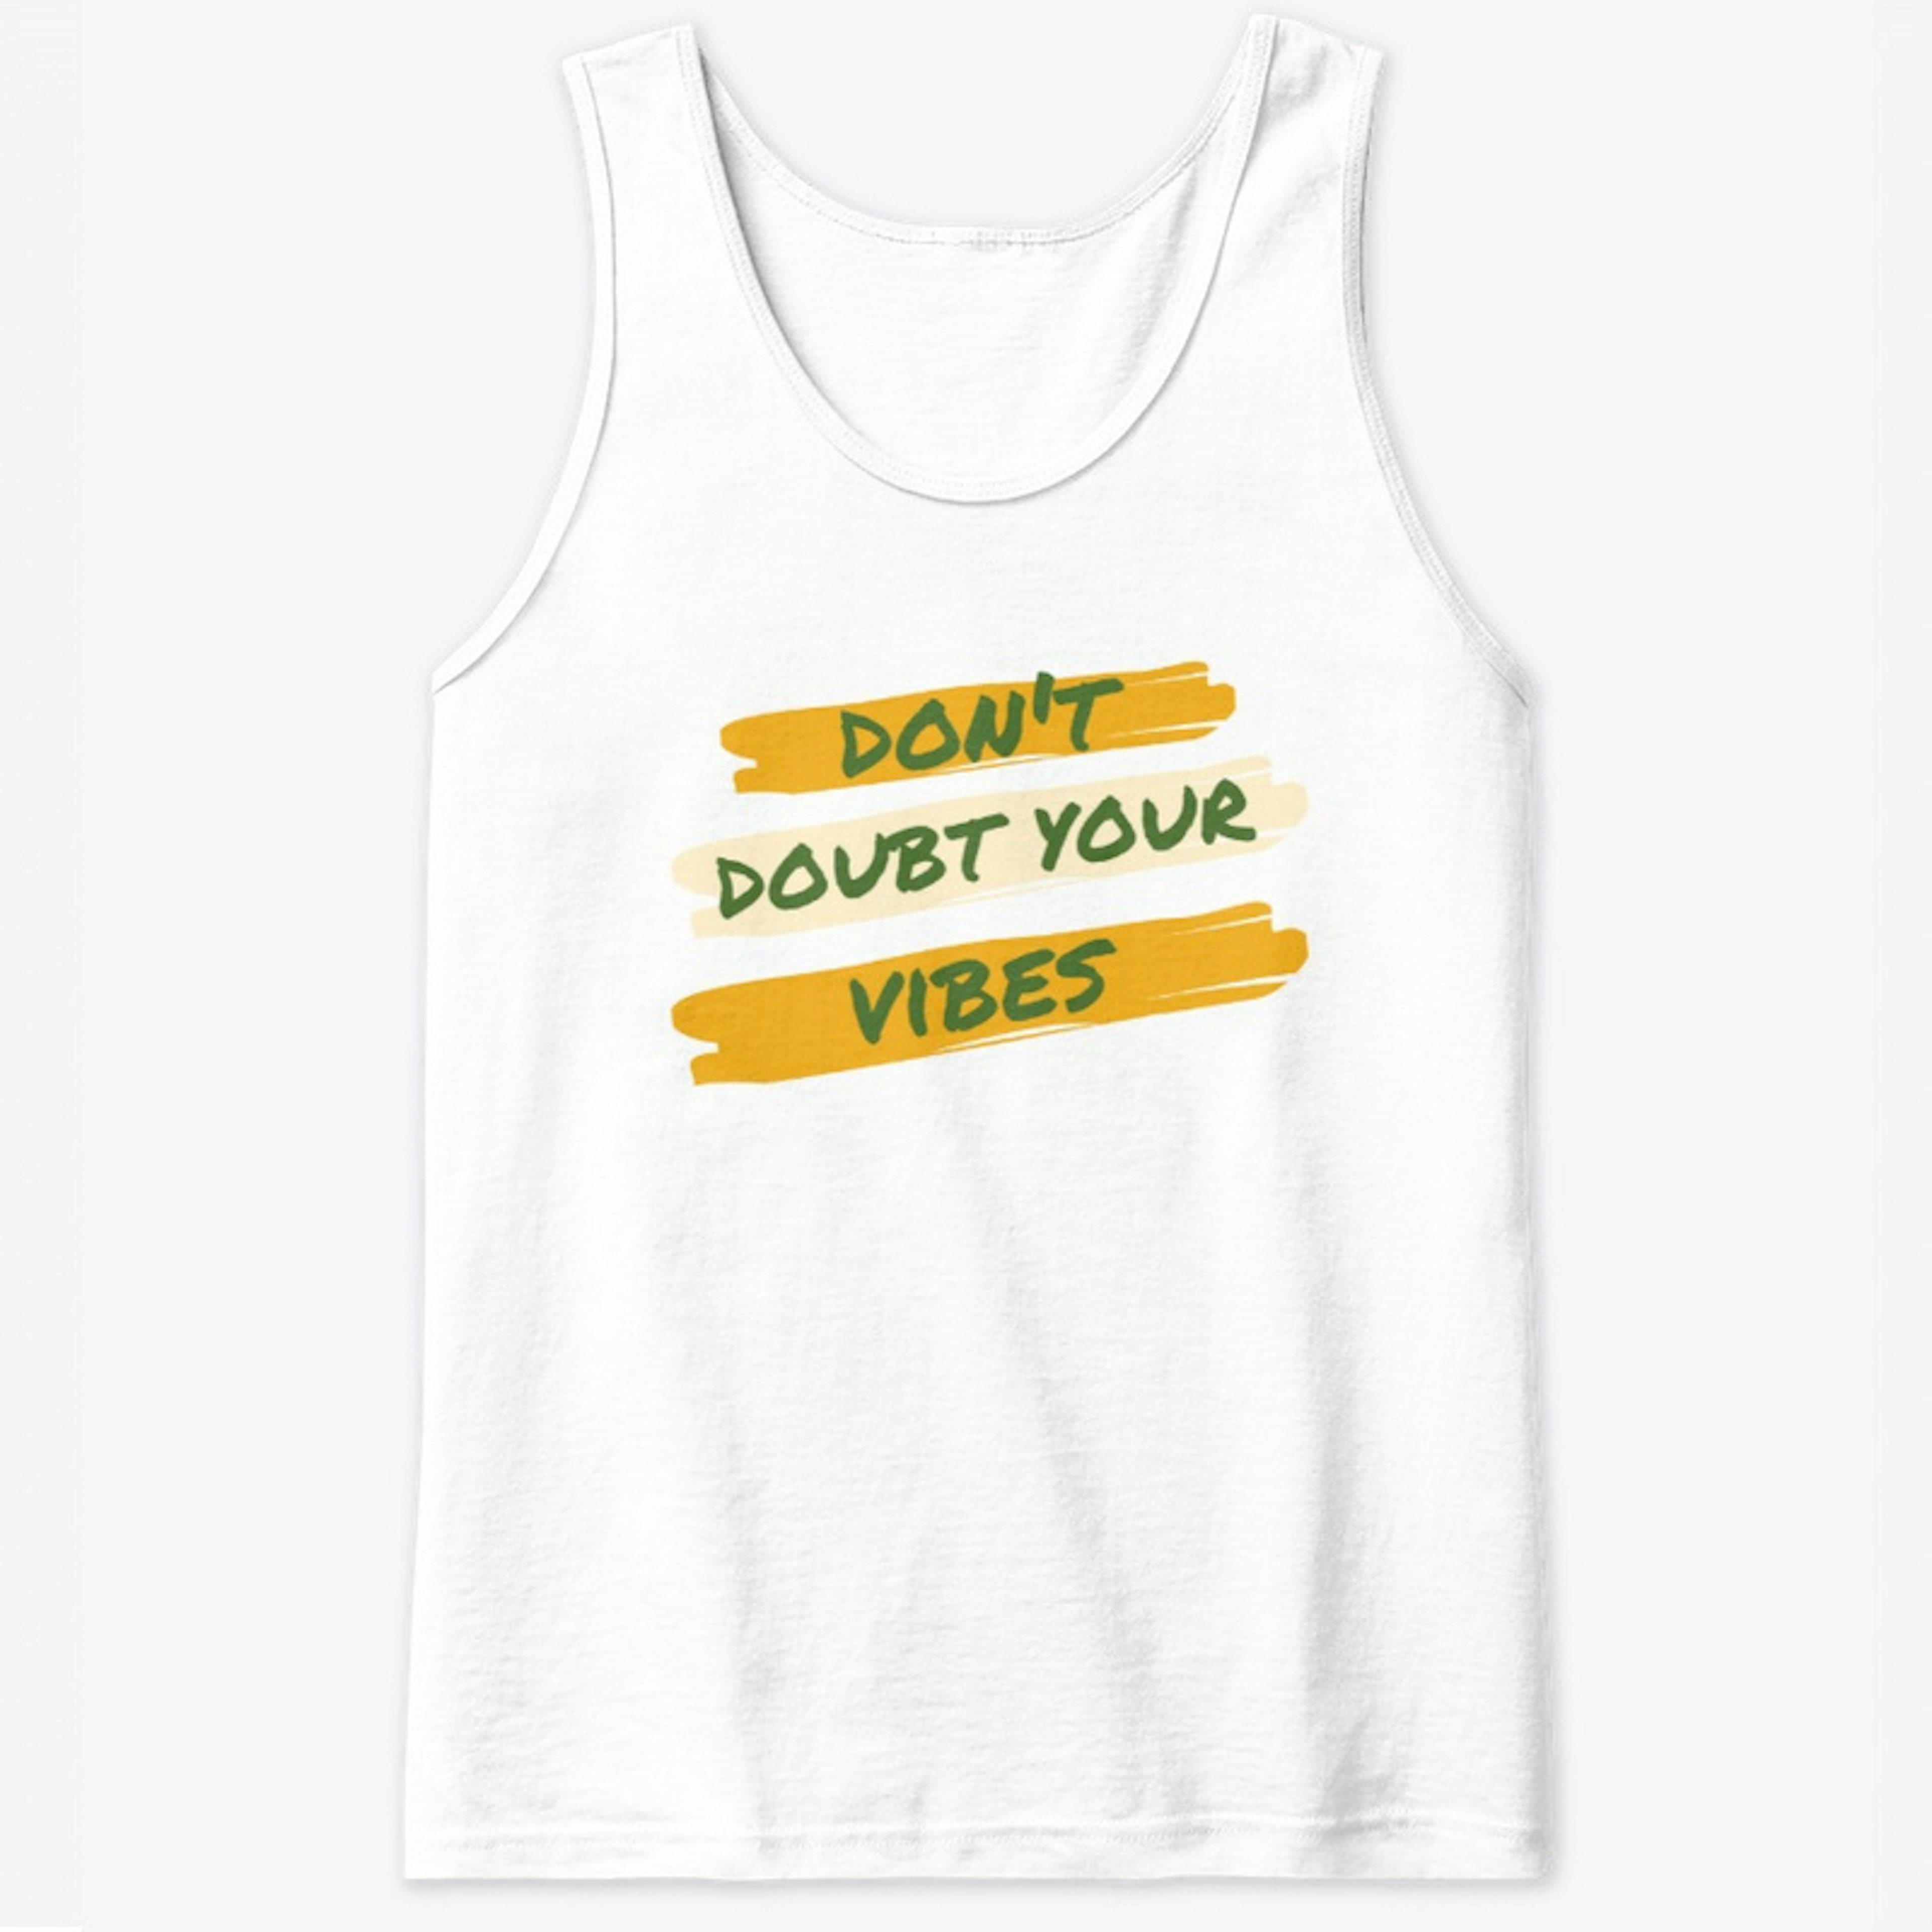 Don't doubt your vibes T shirt